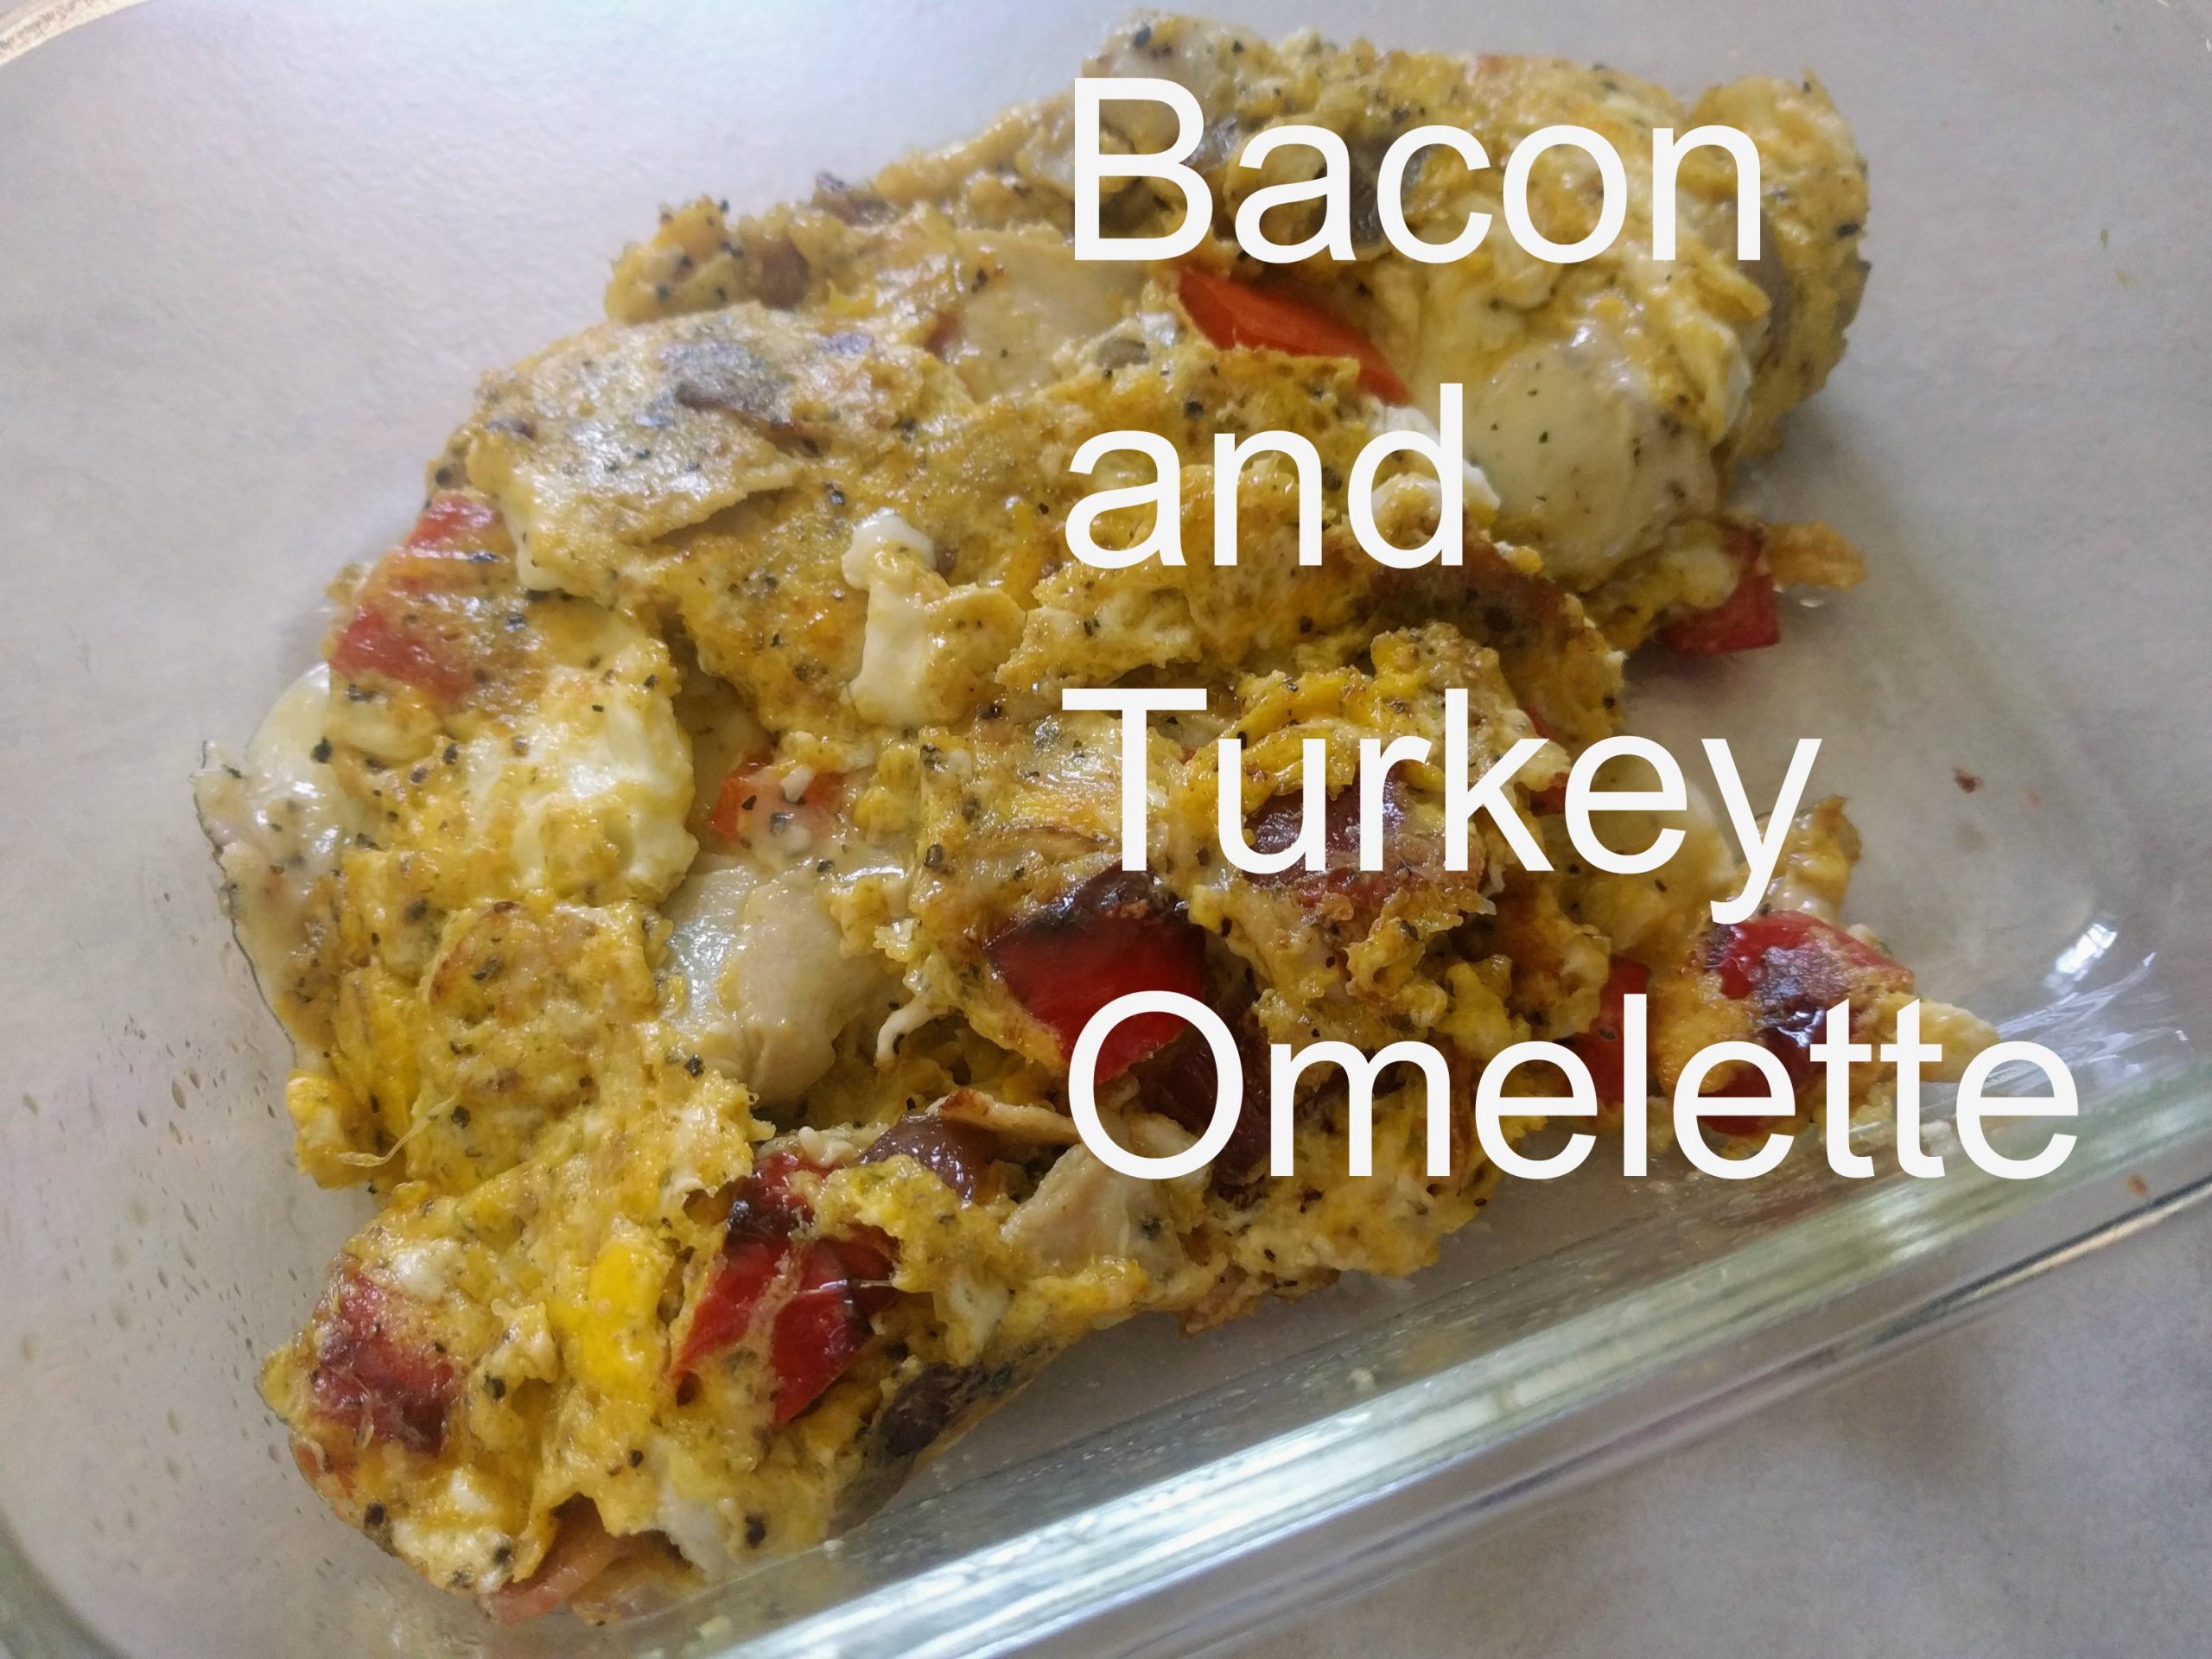 Bacon and Turkey Omelette